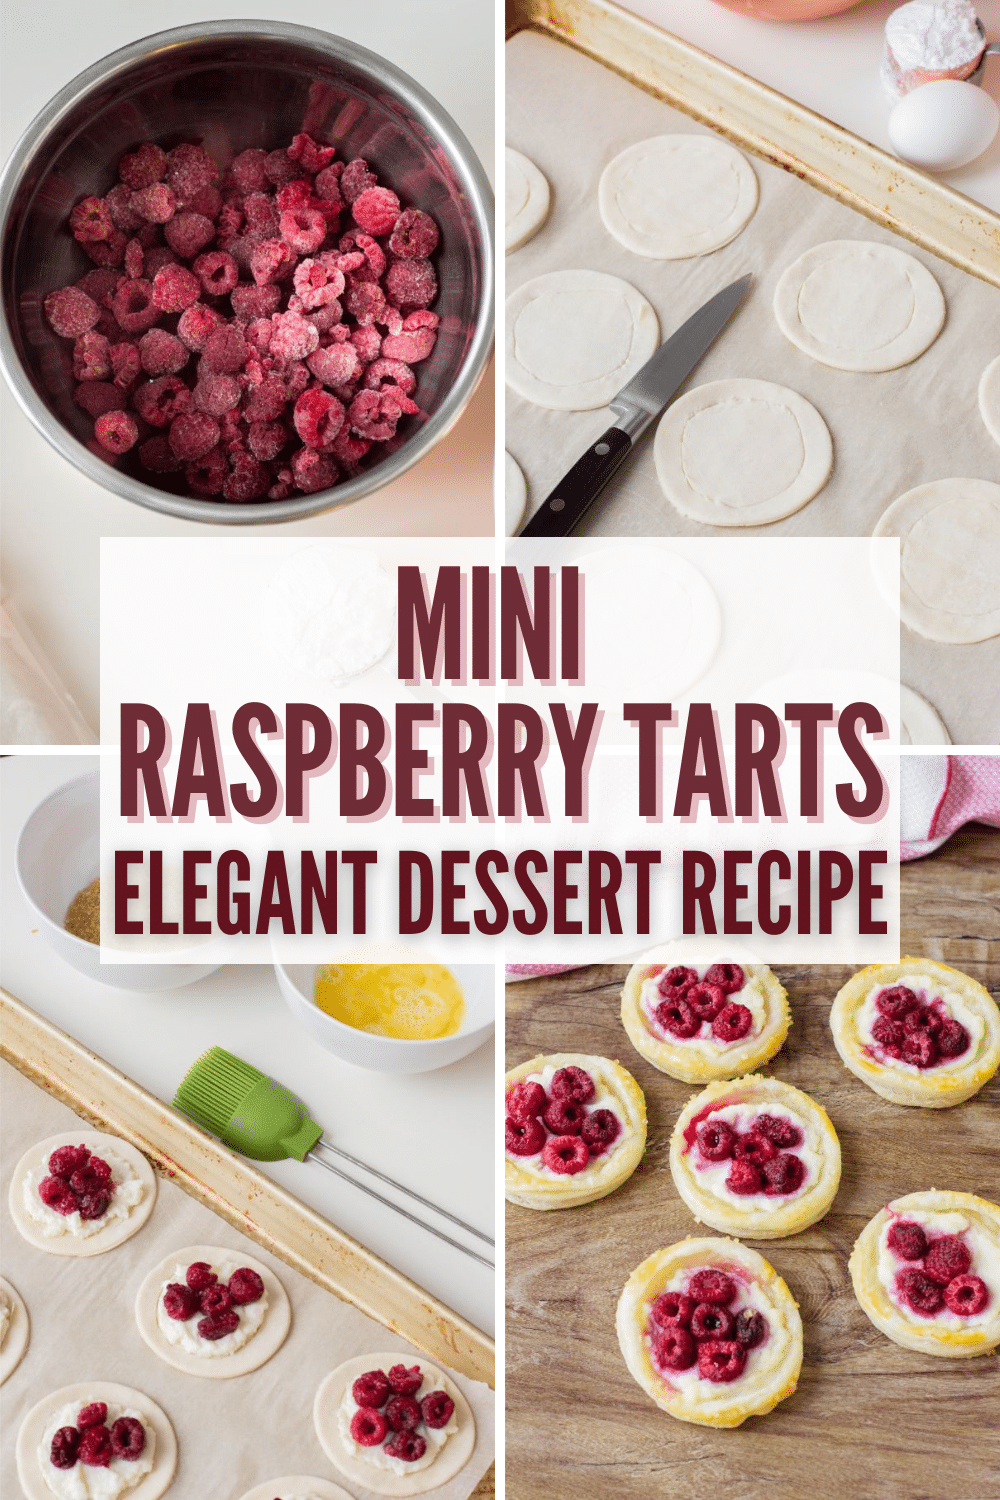 This easy raspberry tart recipe is so easy to make using puff pastry dough. These fruit tarts are delicious and look beautiful on a platter. #raspberries #fruittarts #puffpastry via @wondermomwannab